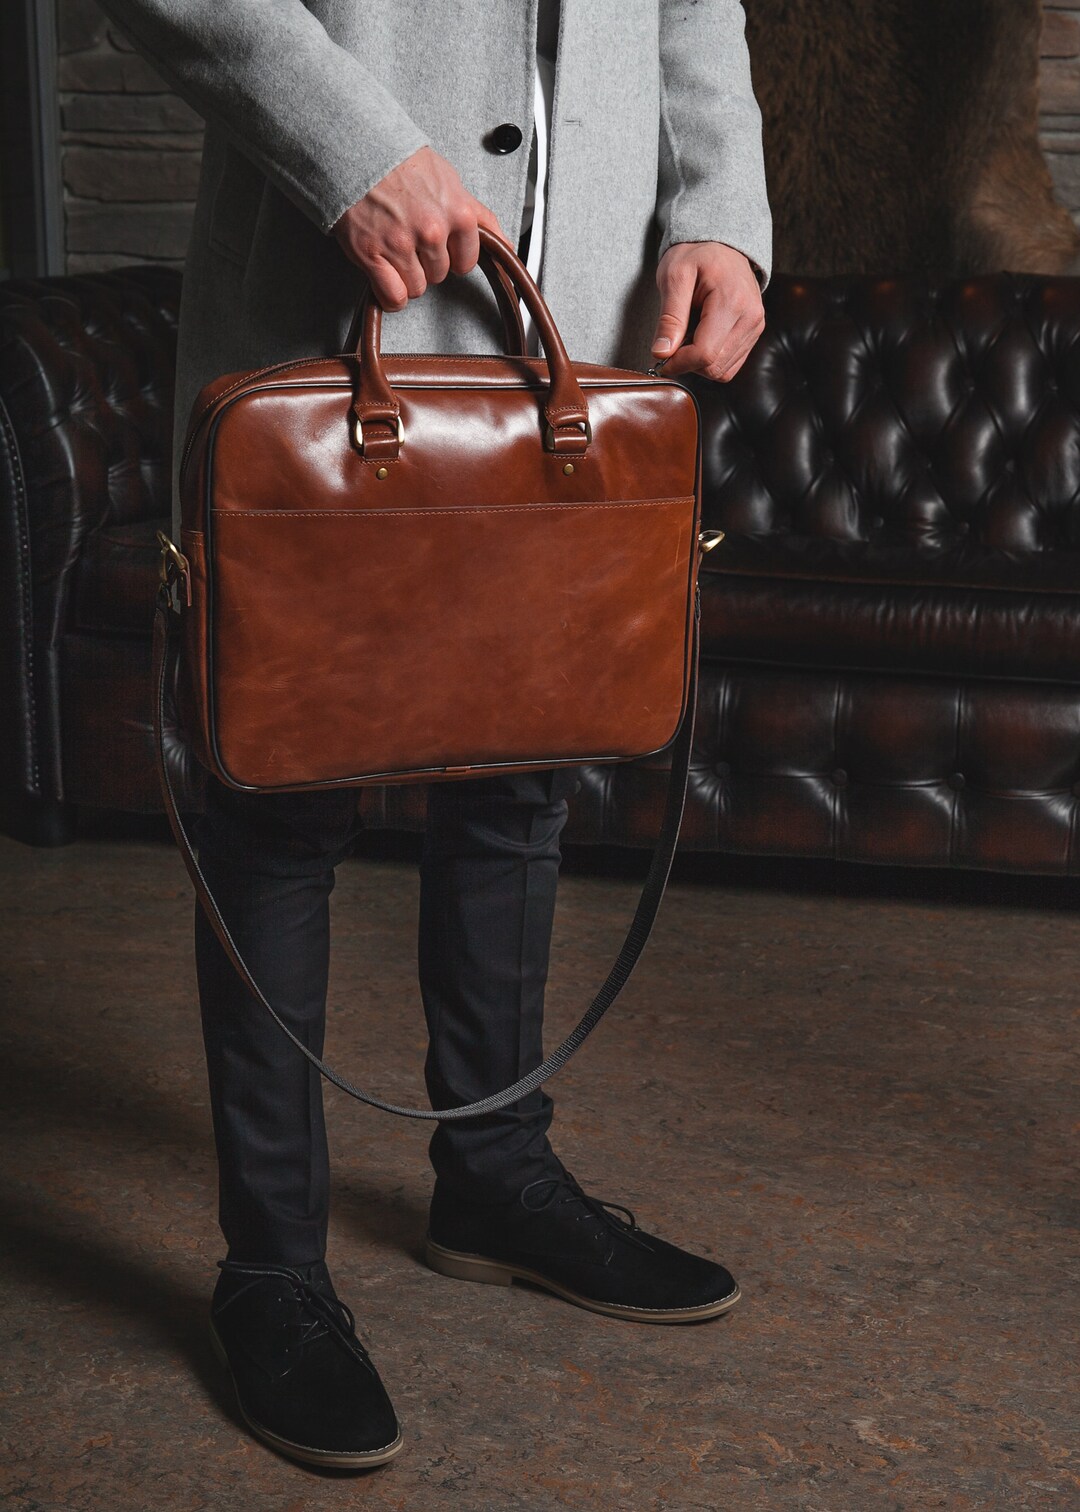 Wholesale Men Office Business Shoulder Bag Leather Executive Briefcase  Luxury Laptop Bag Good Quality Leather Briefcase From m.